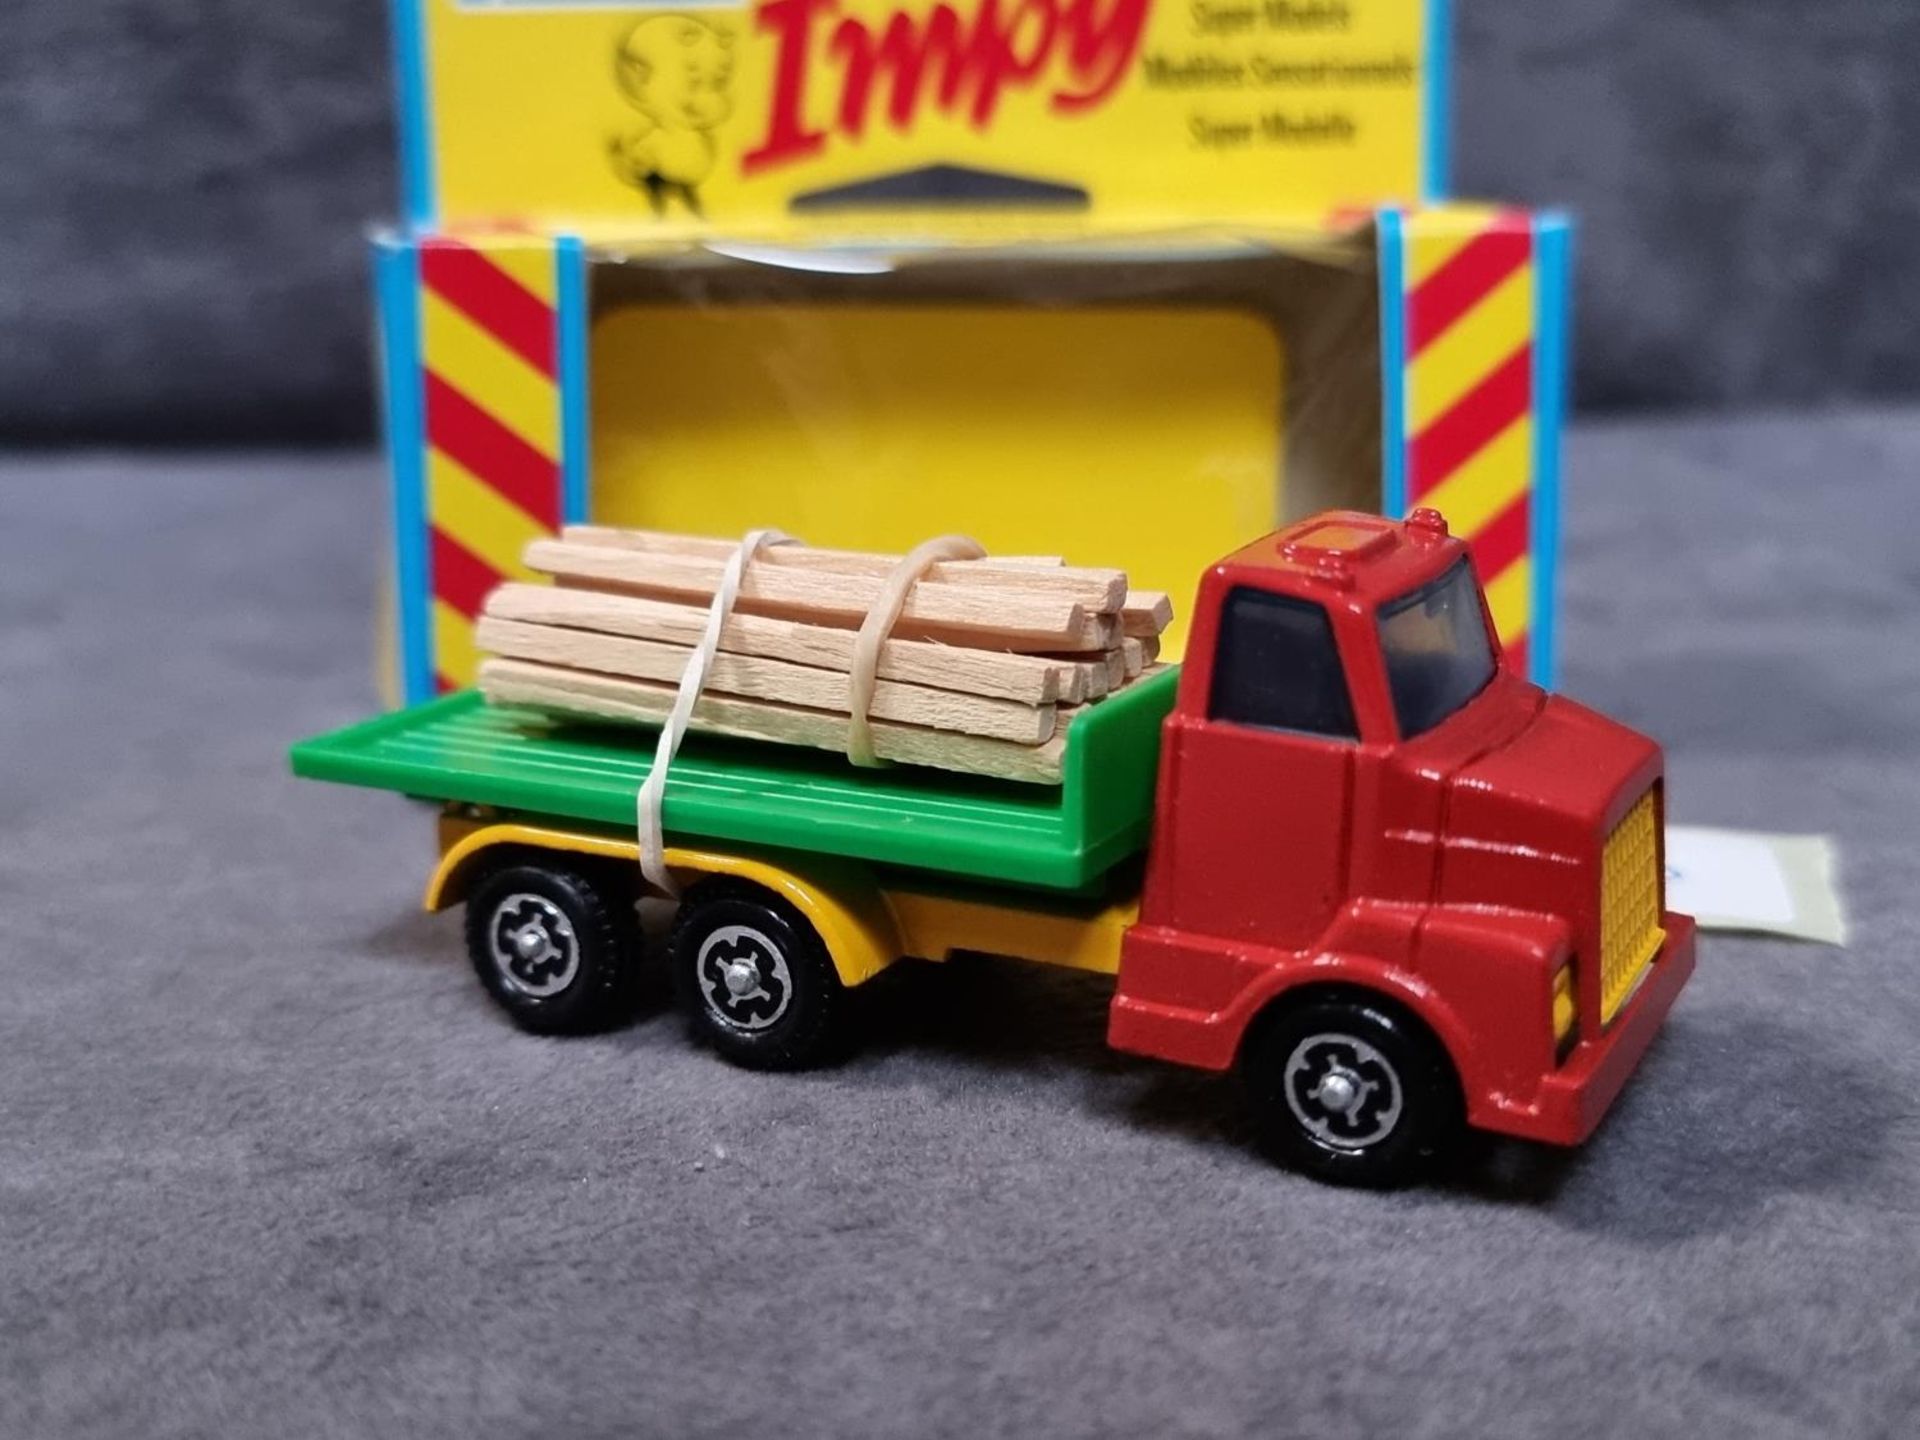 Lonestar Impy #60 Timber Truck Mint Model With A Crisp Box - Image 4 of 4